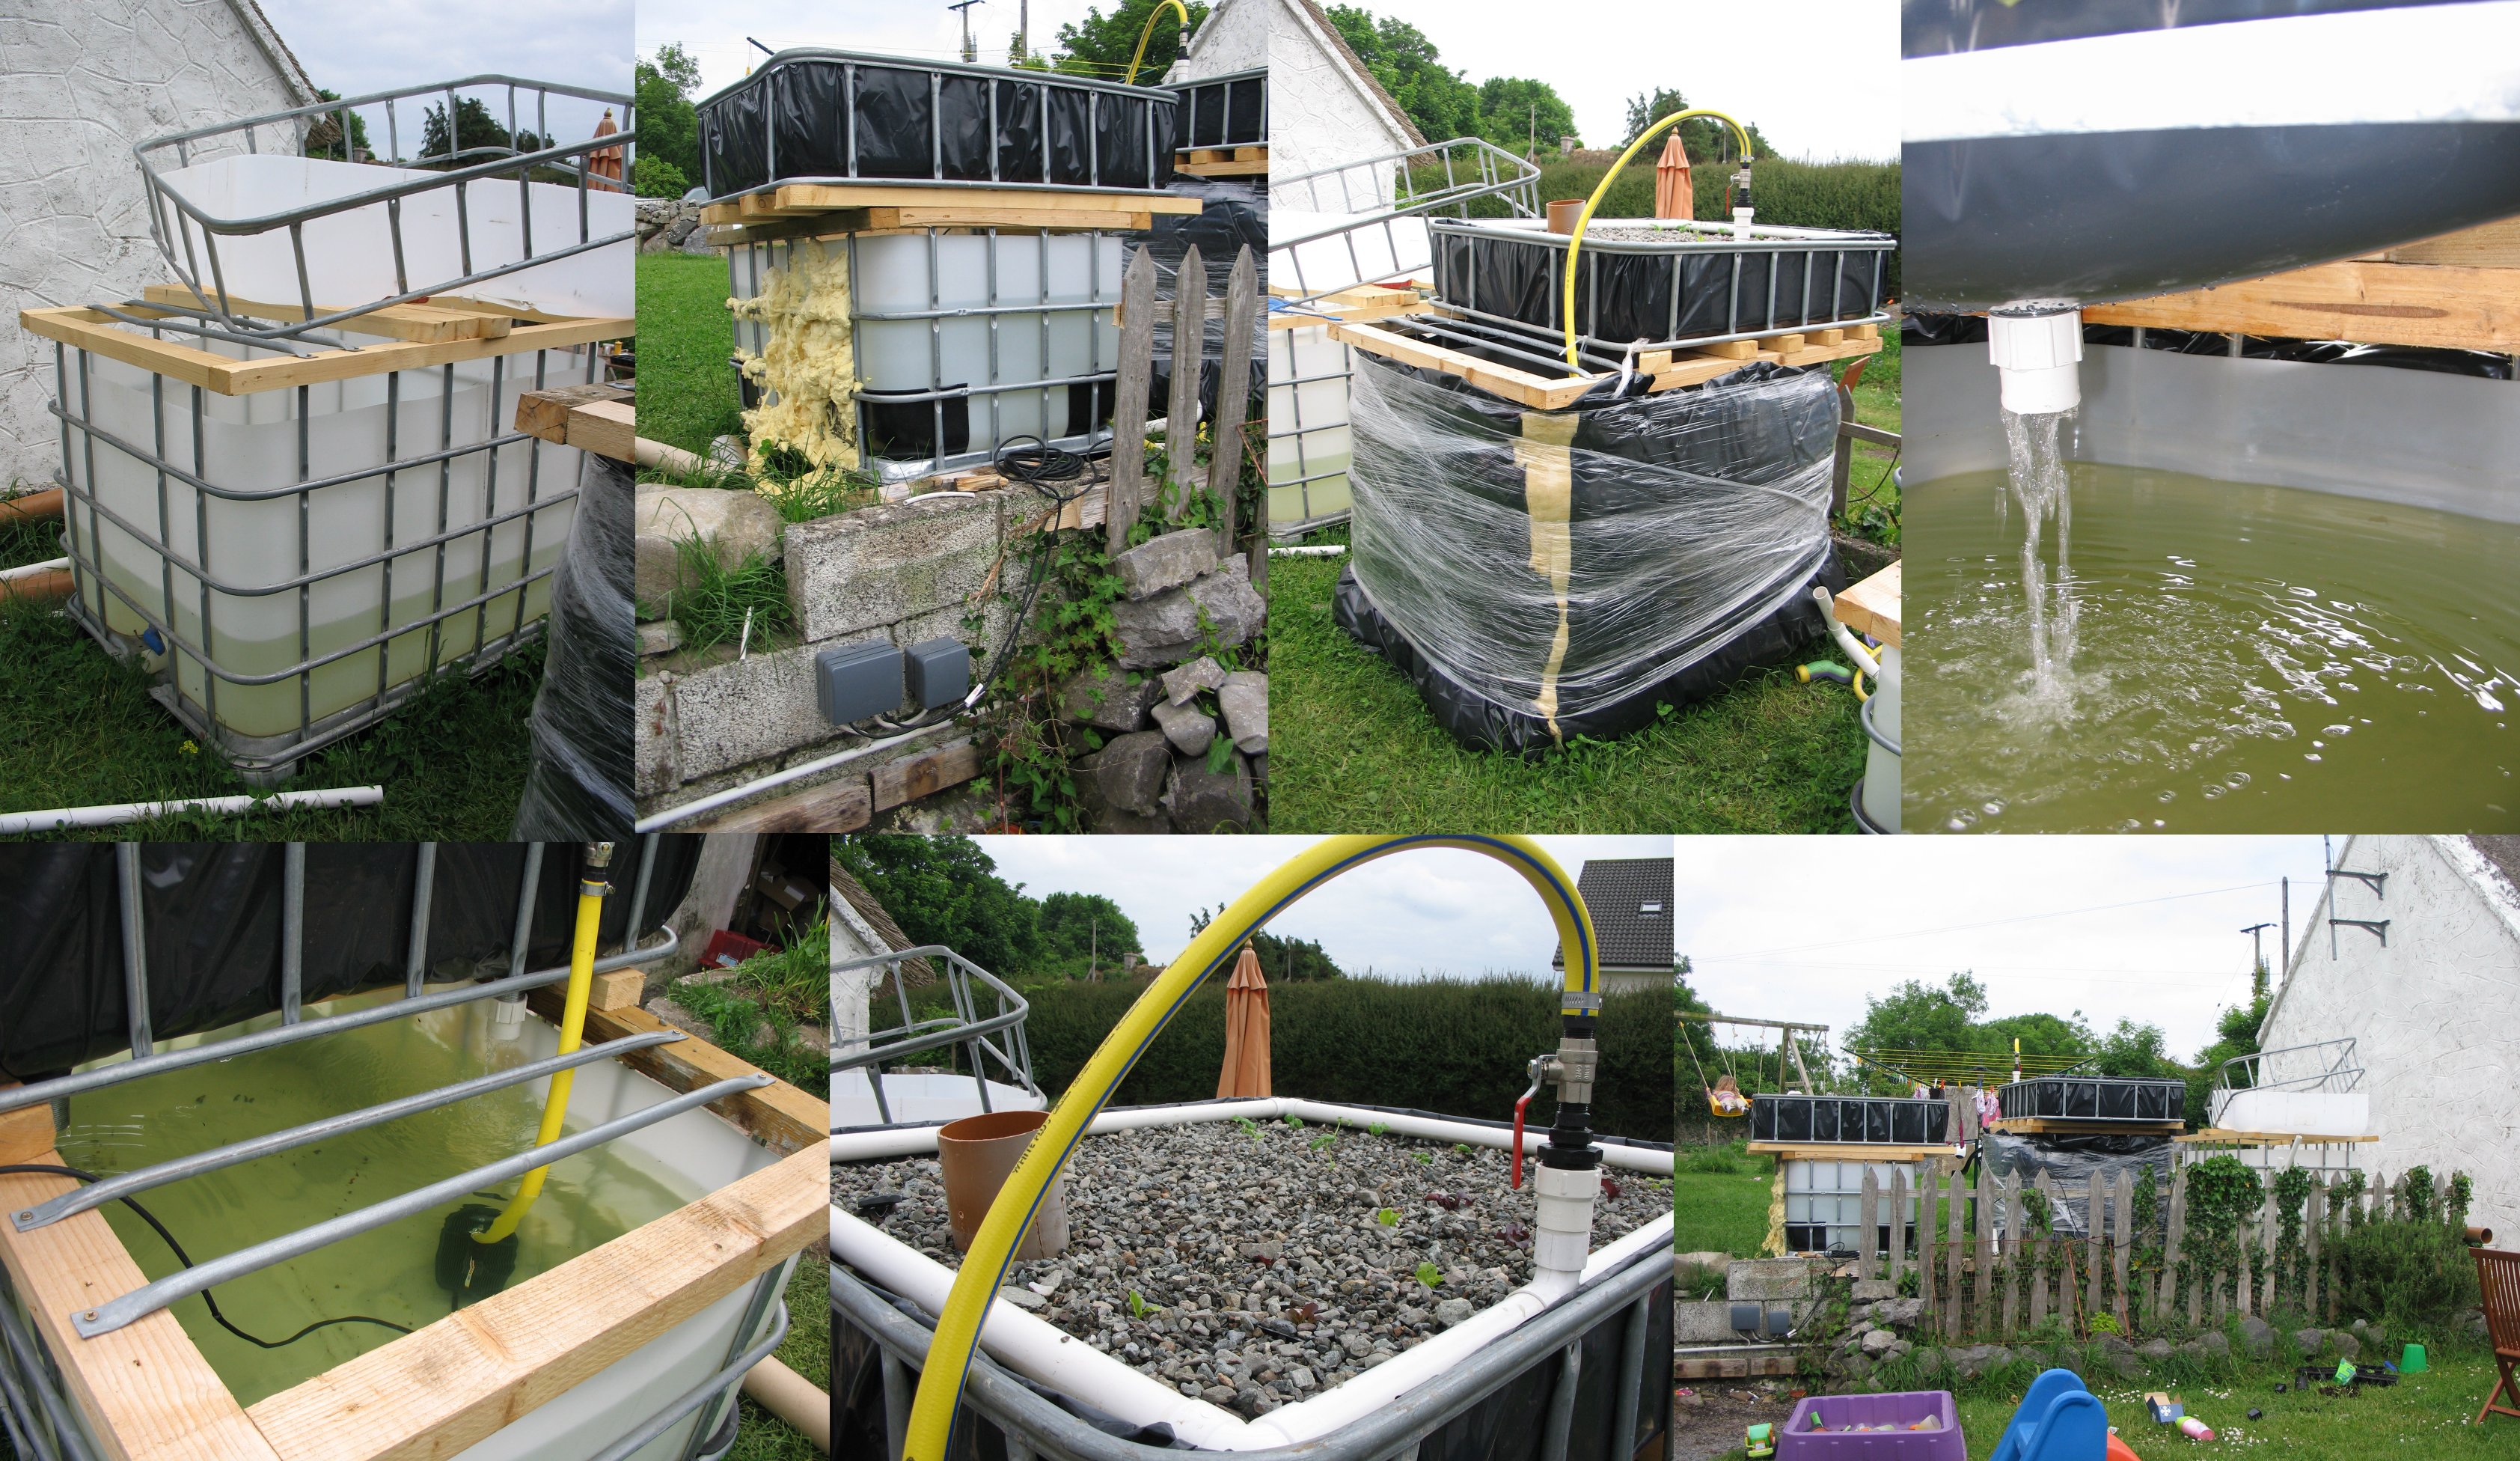  hard on our new side project – our Headford backyard aquaponics